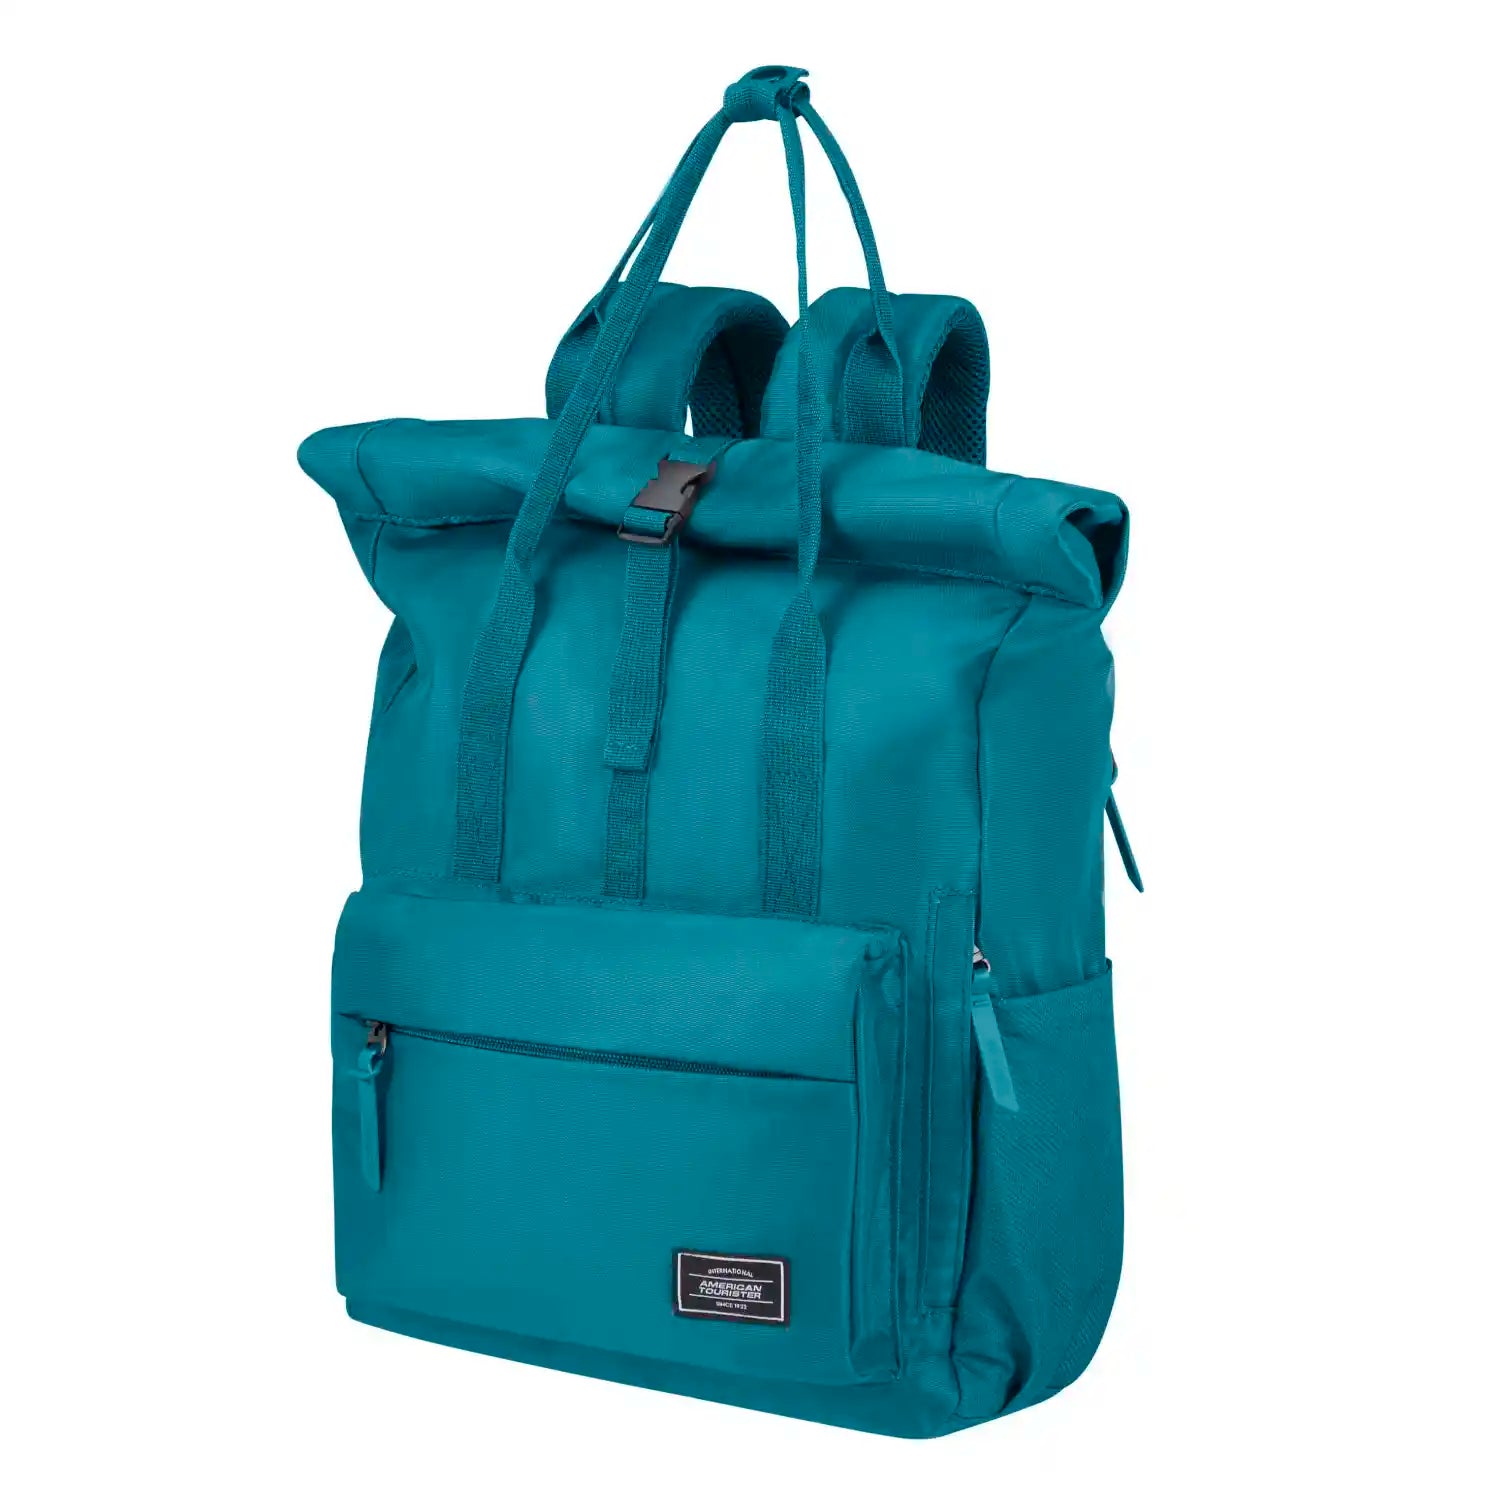 American Tourister Urban Groove Tote Backpack 43 cm - Breeze Blue